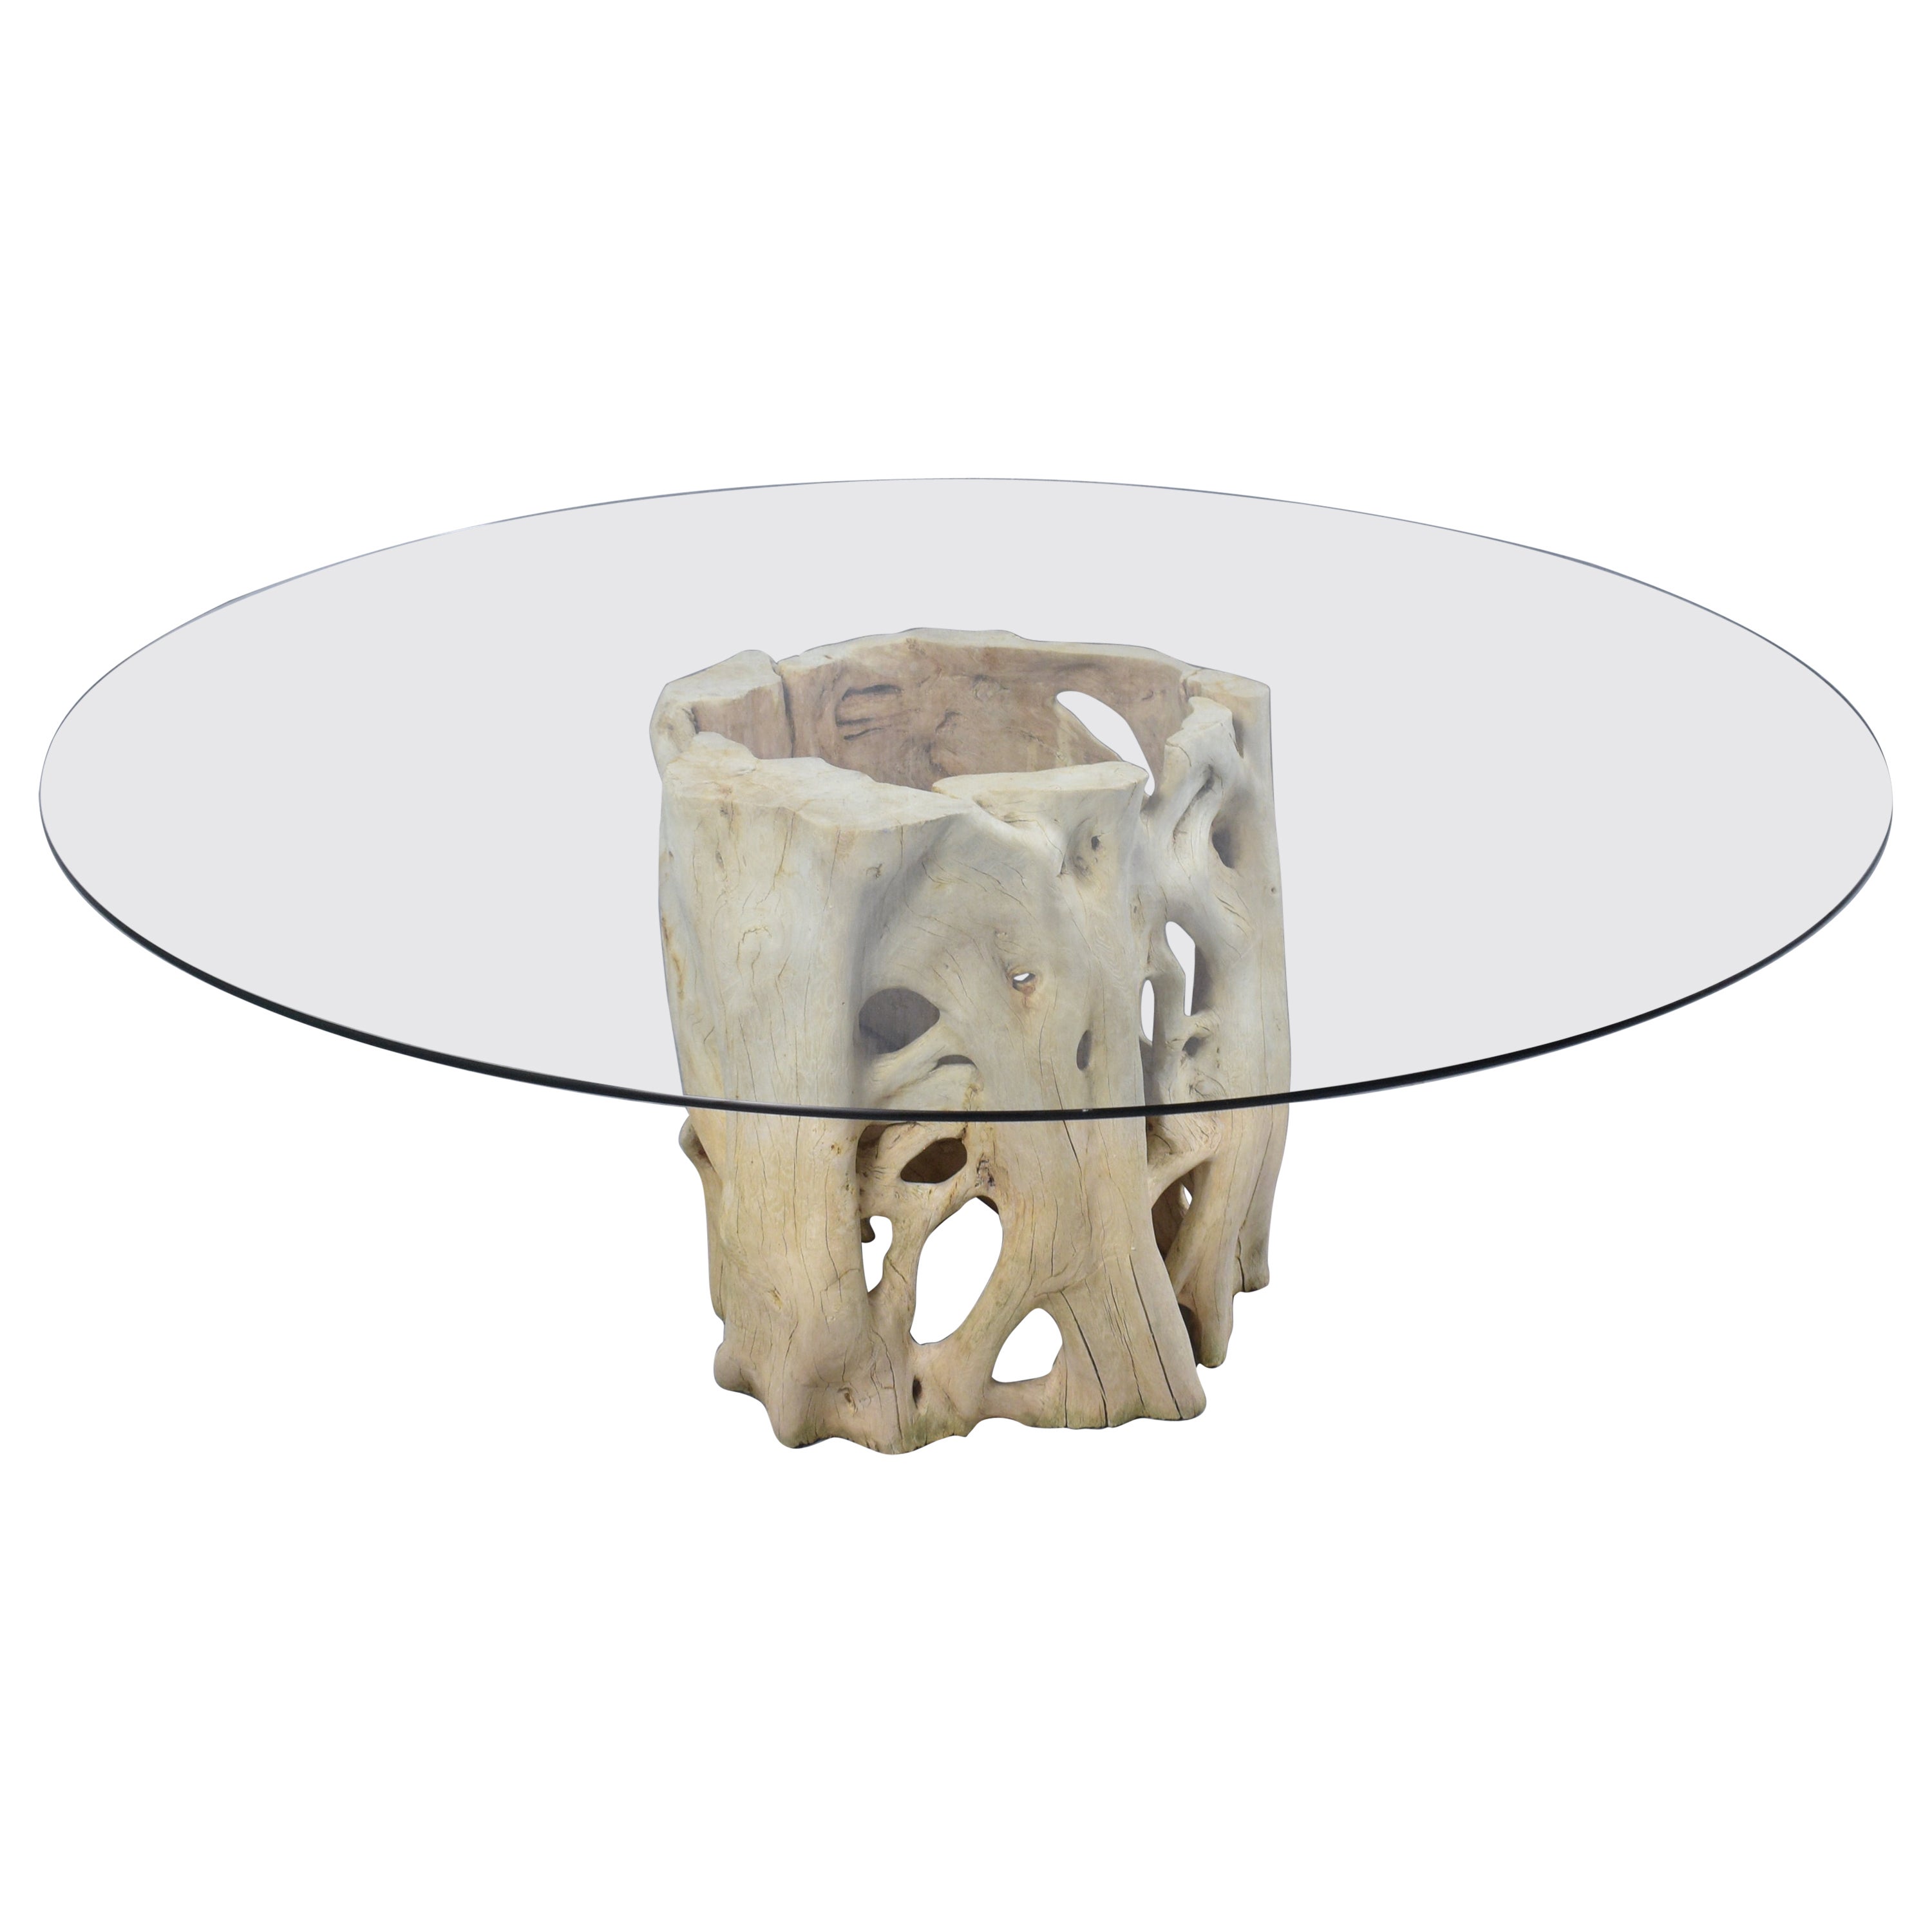 Vintage Cypress Wood Root Tree Dining Table with Round Glass Top